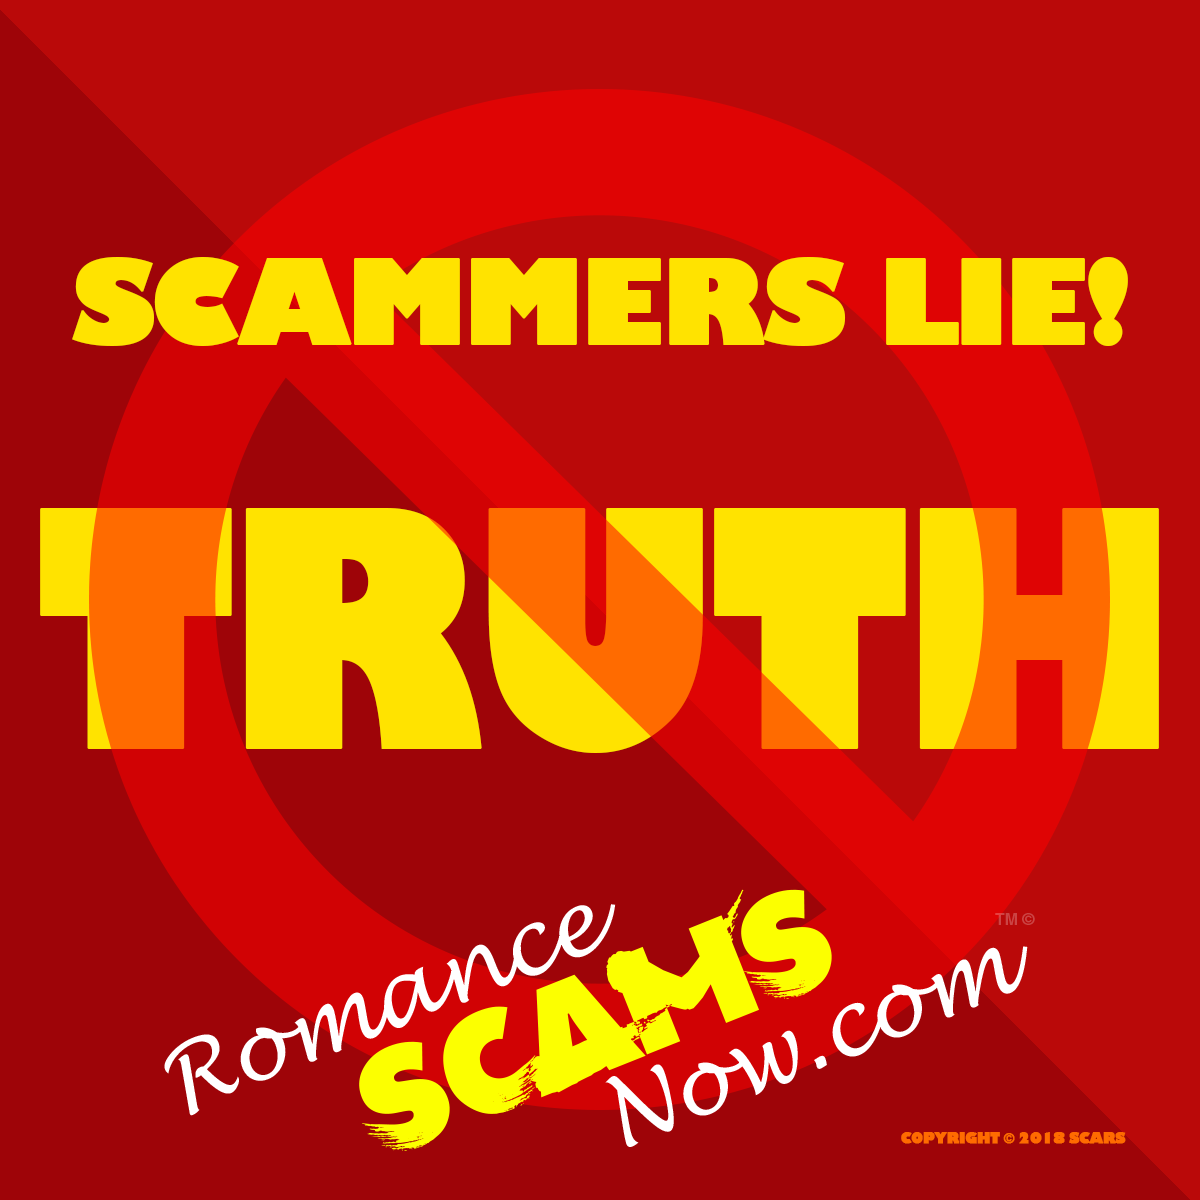 SCARS ™ / RSN™ Anti-Scam Poster 187